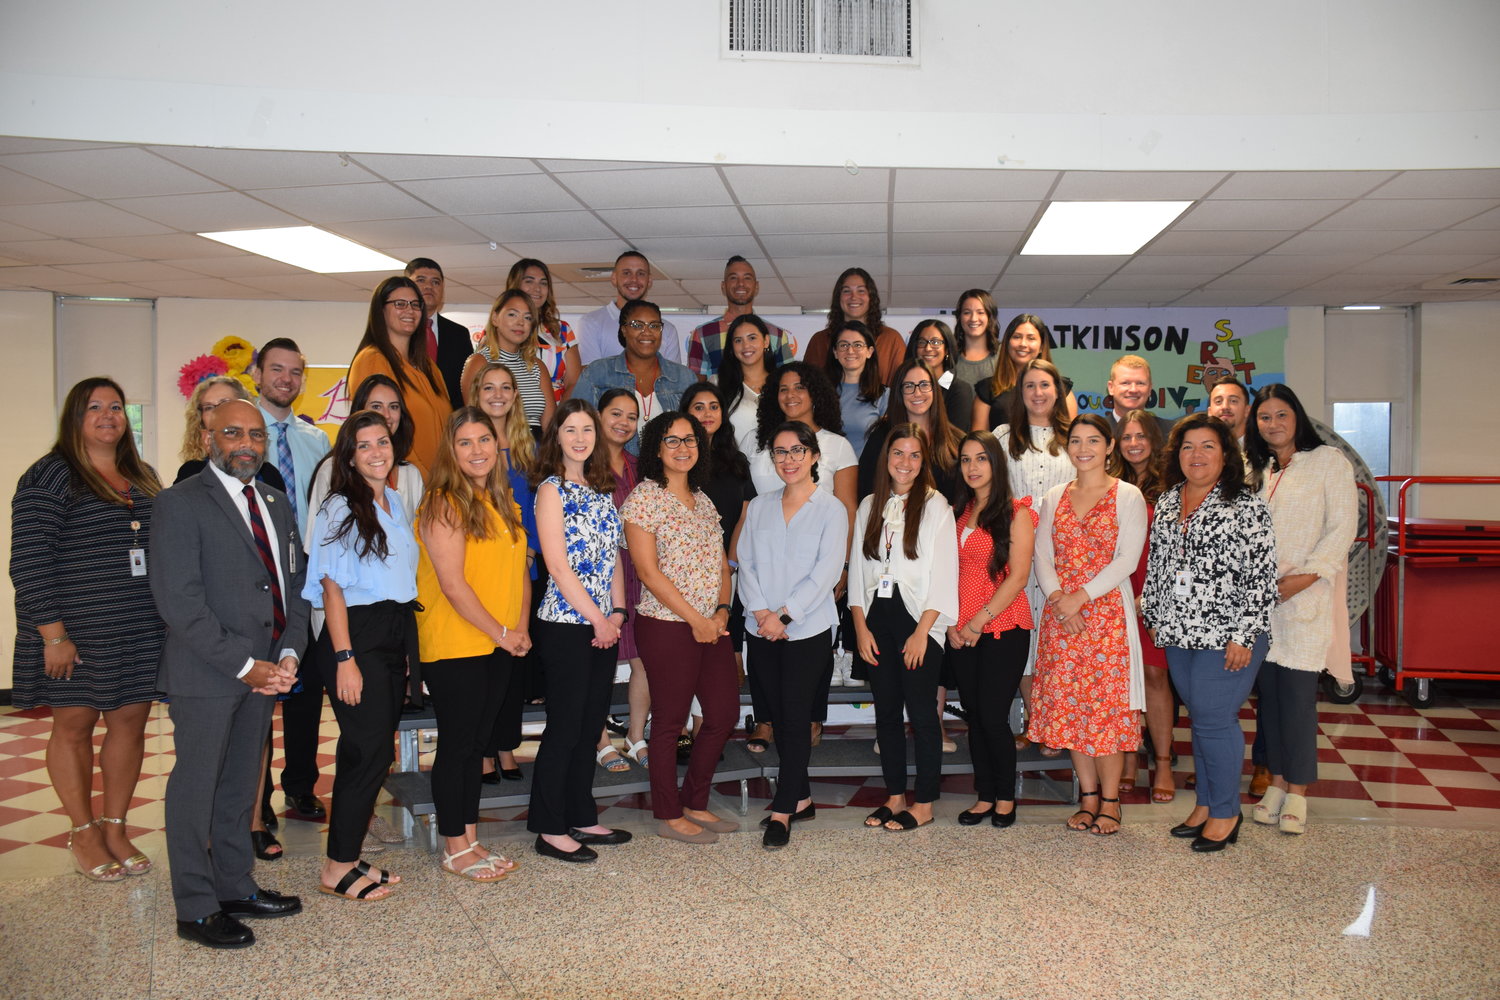 Freeport Public Schools Superintendent of Schools, Dr. Kishore Kuncham (front row left), Board of Education President, Maria Jordan-Awalom (front row second right) and administrators welcomed new educators to the district at new teacher orientation on August 31